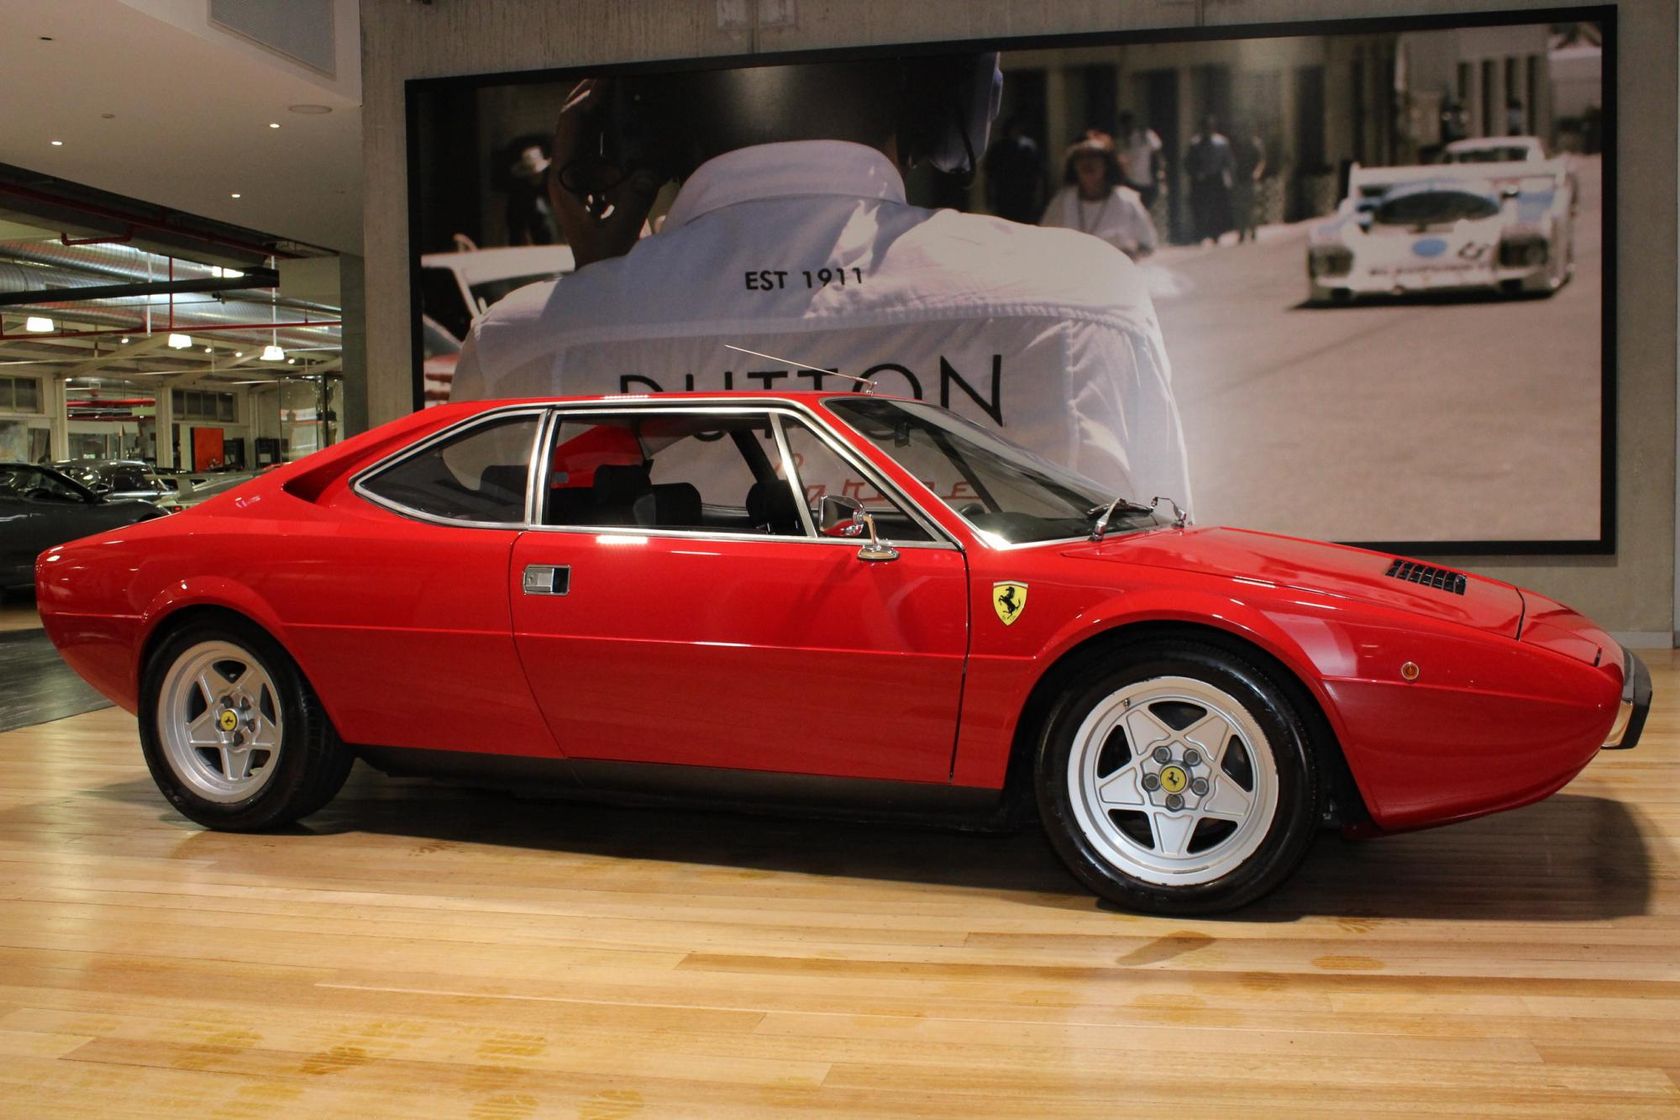 1975 Ferrari Dino 308 GT4 Coupe for sale on Luxify